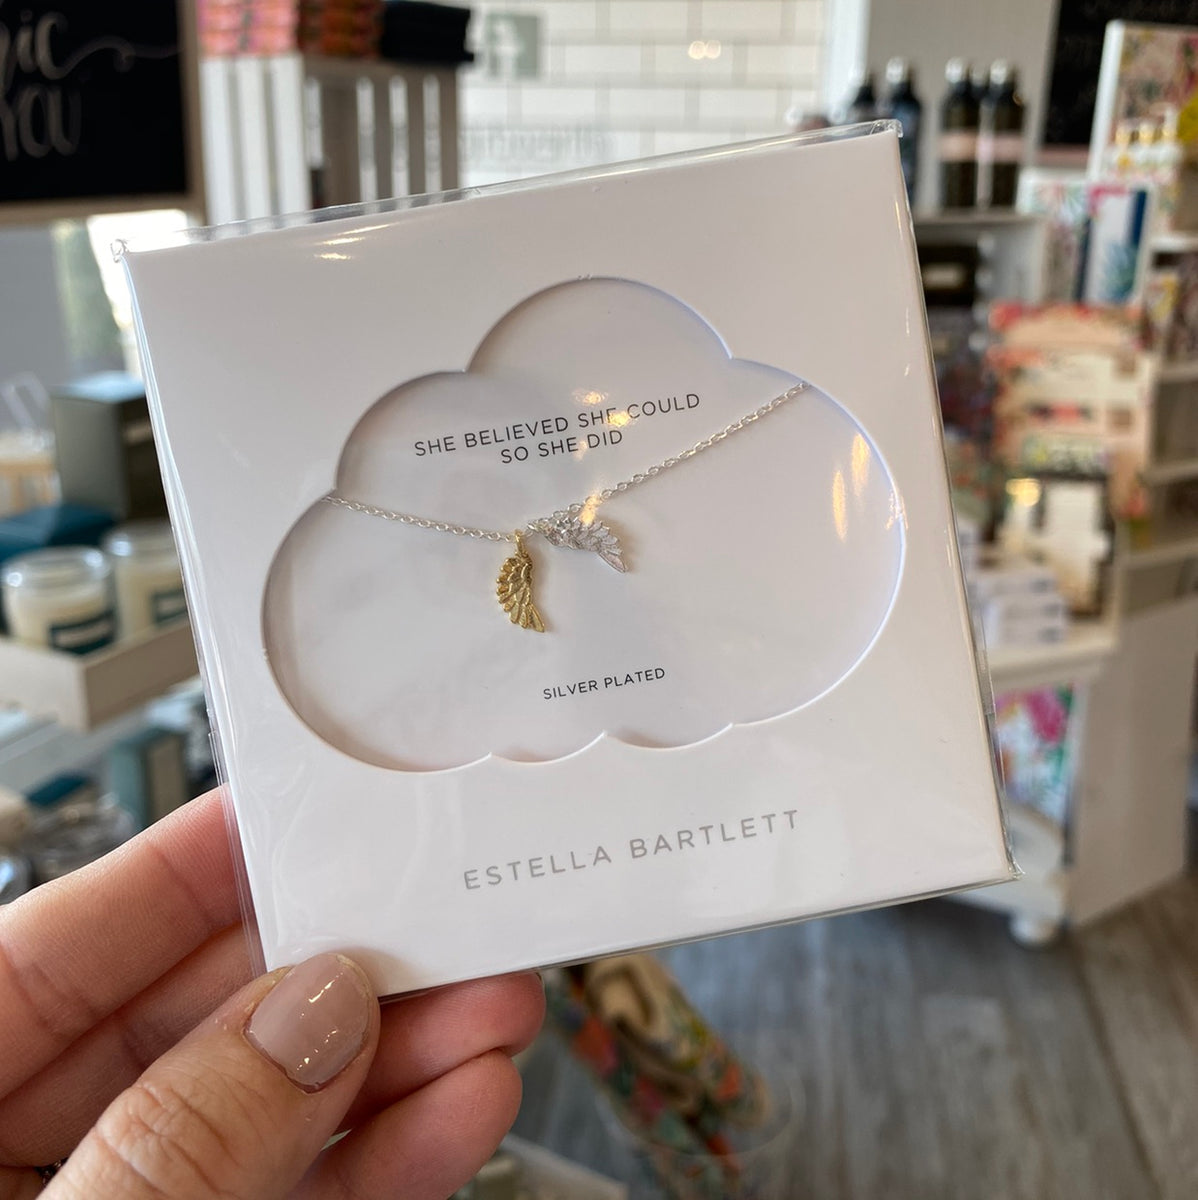 How To Clean Silver Plated Jewellery – Estella Bartlett